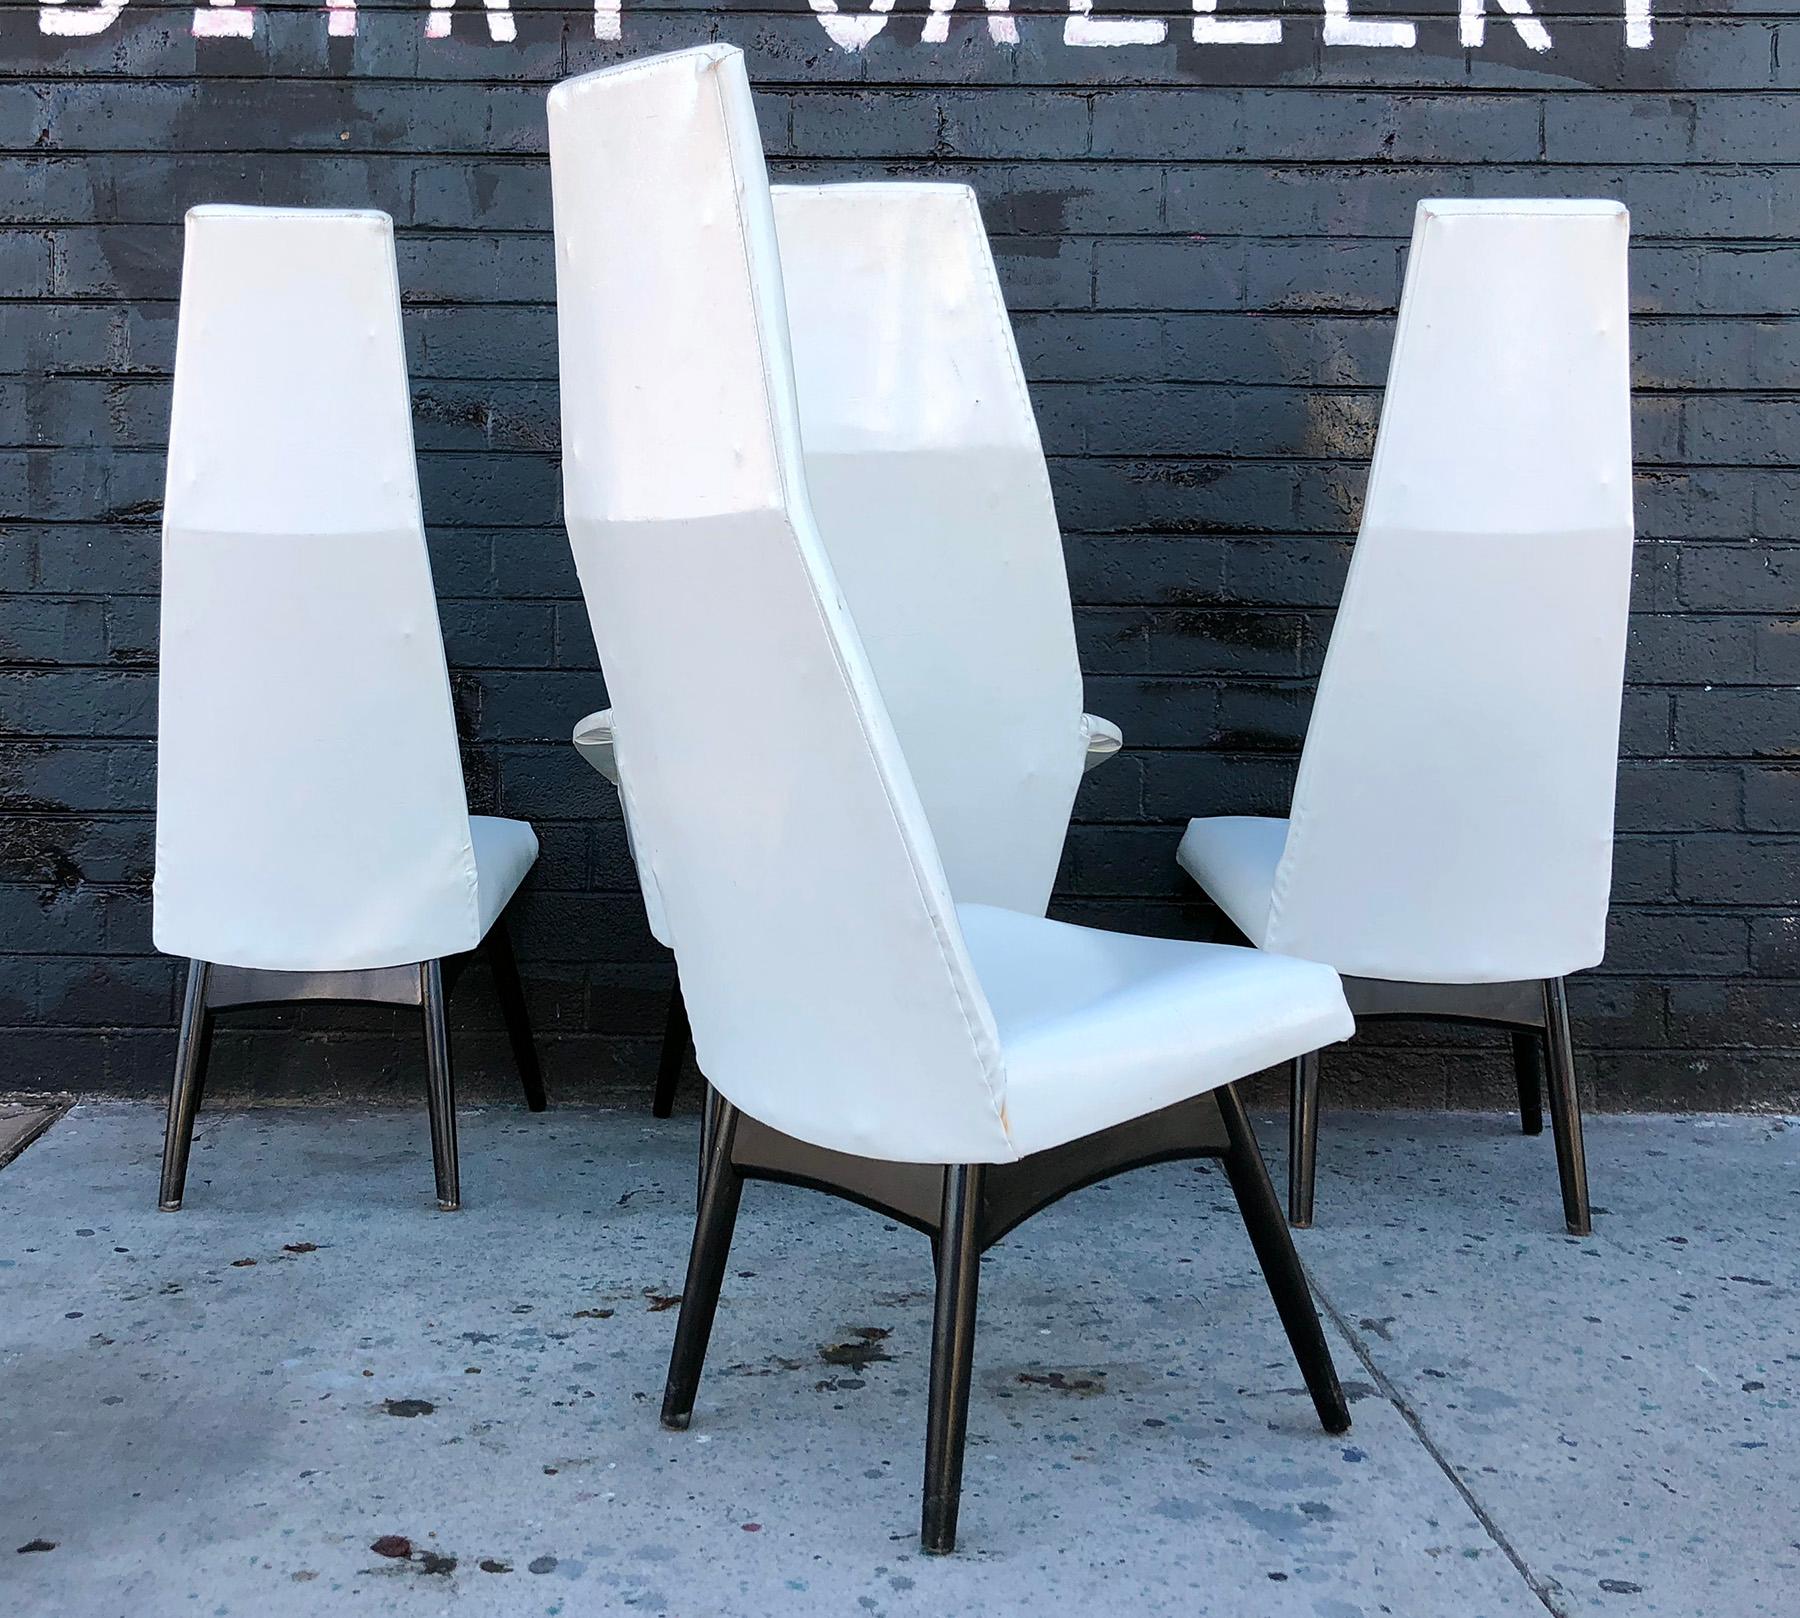 A gorgeous set of Adrian Pearsall high back dining chairs. Each chair is a gorgeous statement piece and is a great piece of sculptural furniture. Three side chairs and 1 captain chair. Chairs are upholstered in their original white vinyl and feature